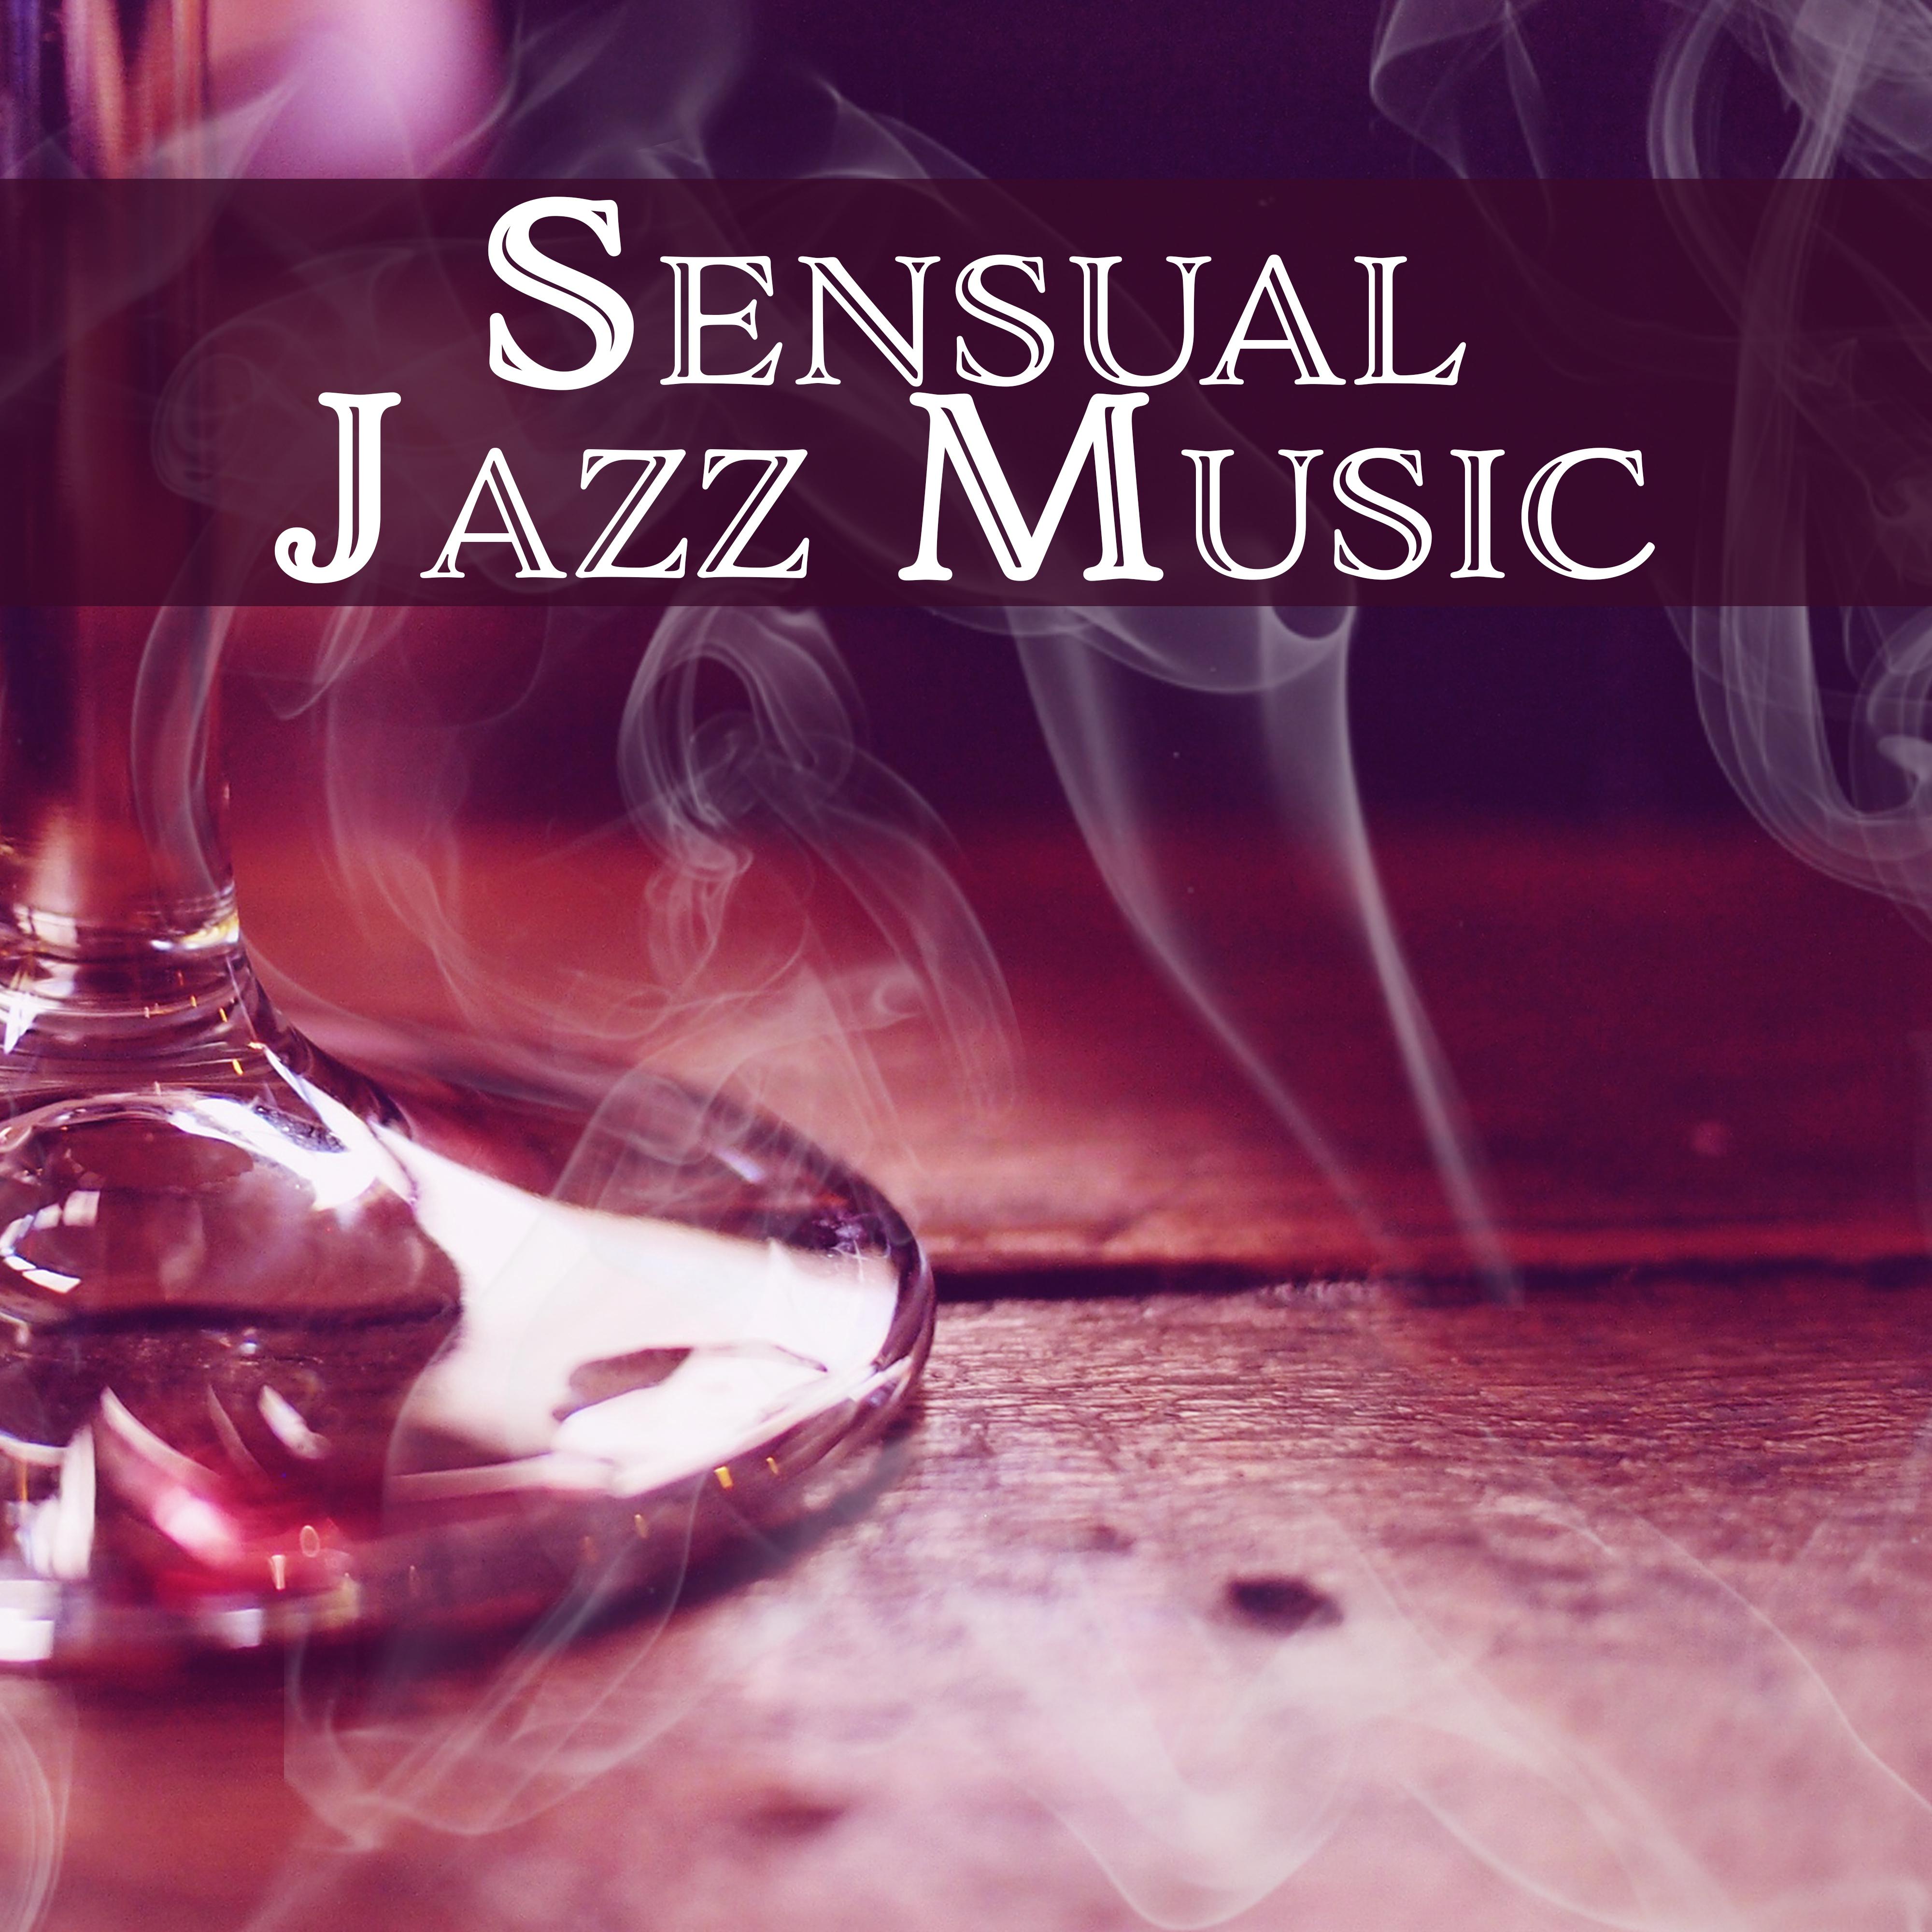 Sensual Jazz Music  Instrumental Sounds for Relaxation, Songs at Night, Smooth Jazz, Piano Music, Night Jazz